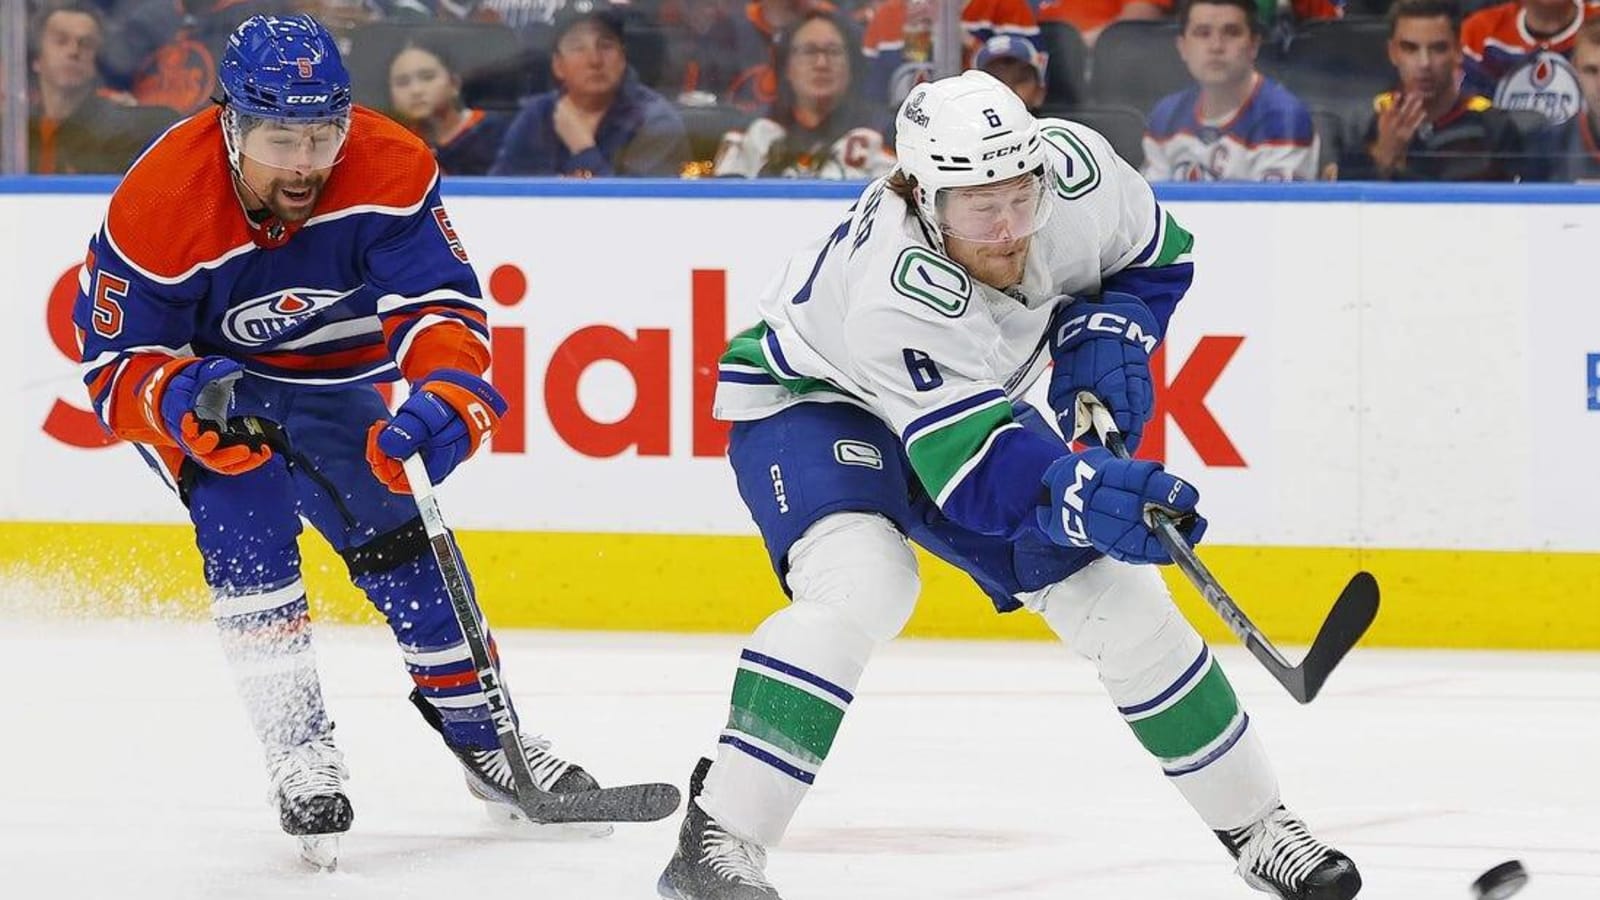 Report: Canucks star Brock Boeser (blood clotting) likely out vs. Oilers